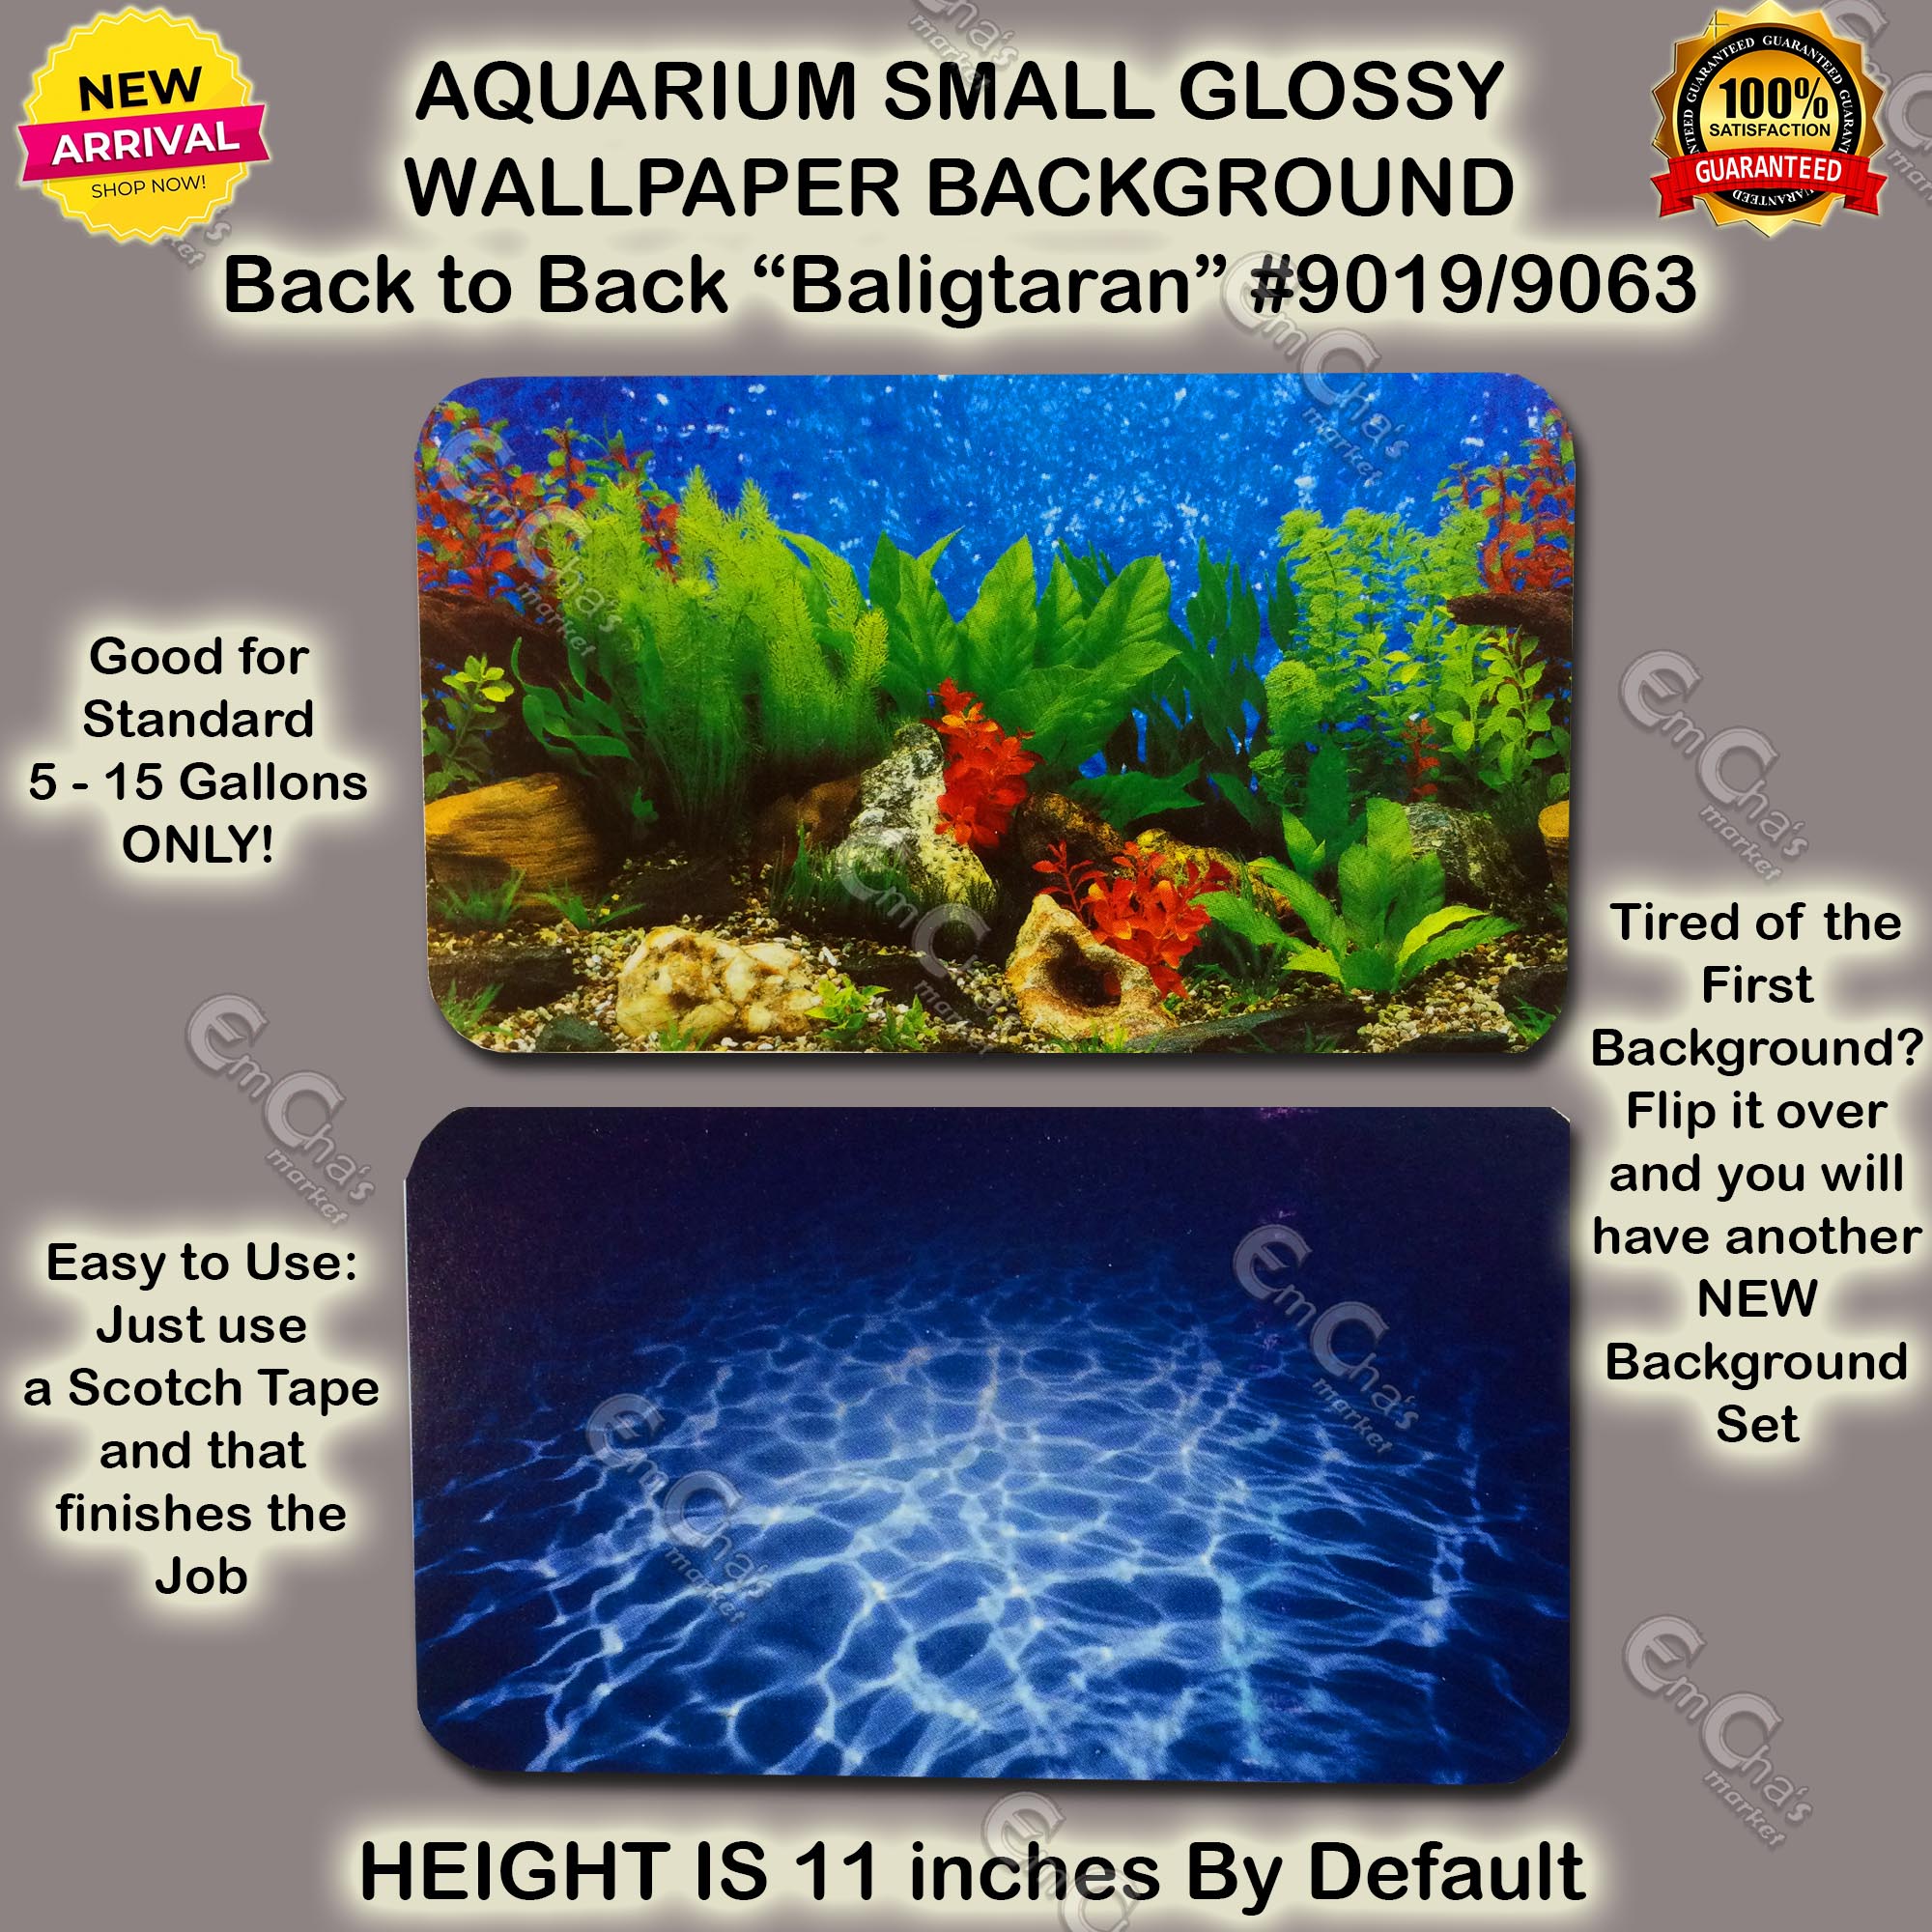 For 5 to 15 Gallons ONLY! Aquarium Length SMALL 